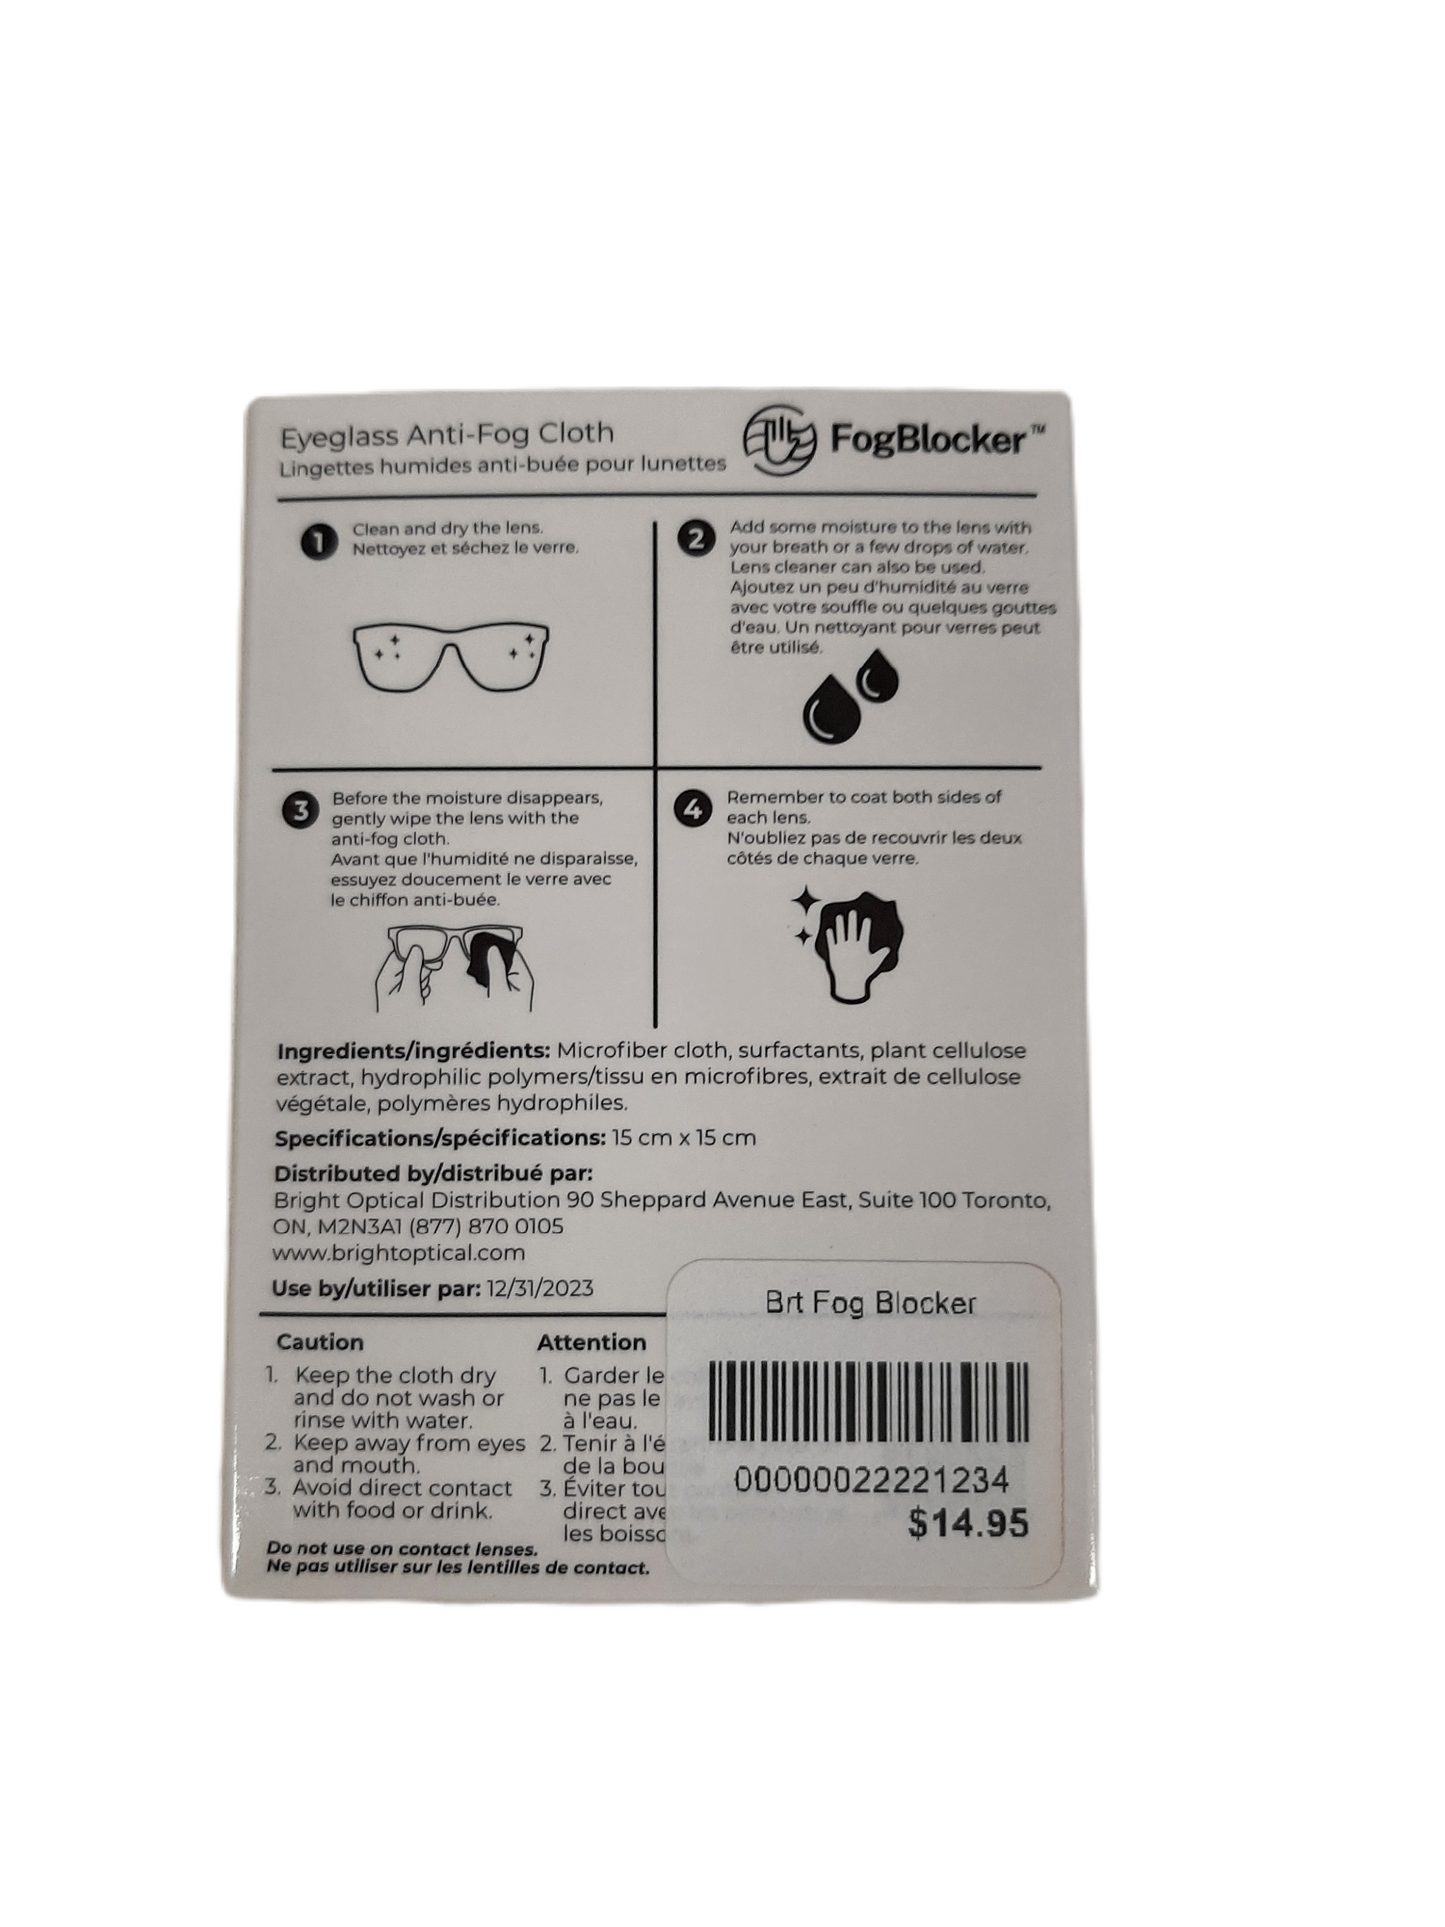 There are ordinary fog wipes and then there is patent-pending FogBlocker. This revolutionary new product designed by biotech scientists is a game-changer compared to the most popular anti-fog solutions. A FogBlocker dry wipe can be used well over 500 times and lasts all day! Its ultrafine microfiber cloth can be safely used on any lenses including those that are coated. You can even apply it to all your PPE plastic guards and goggles.   